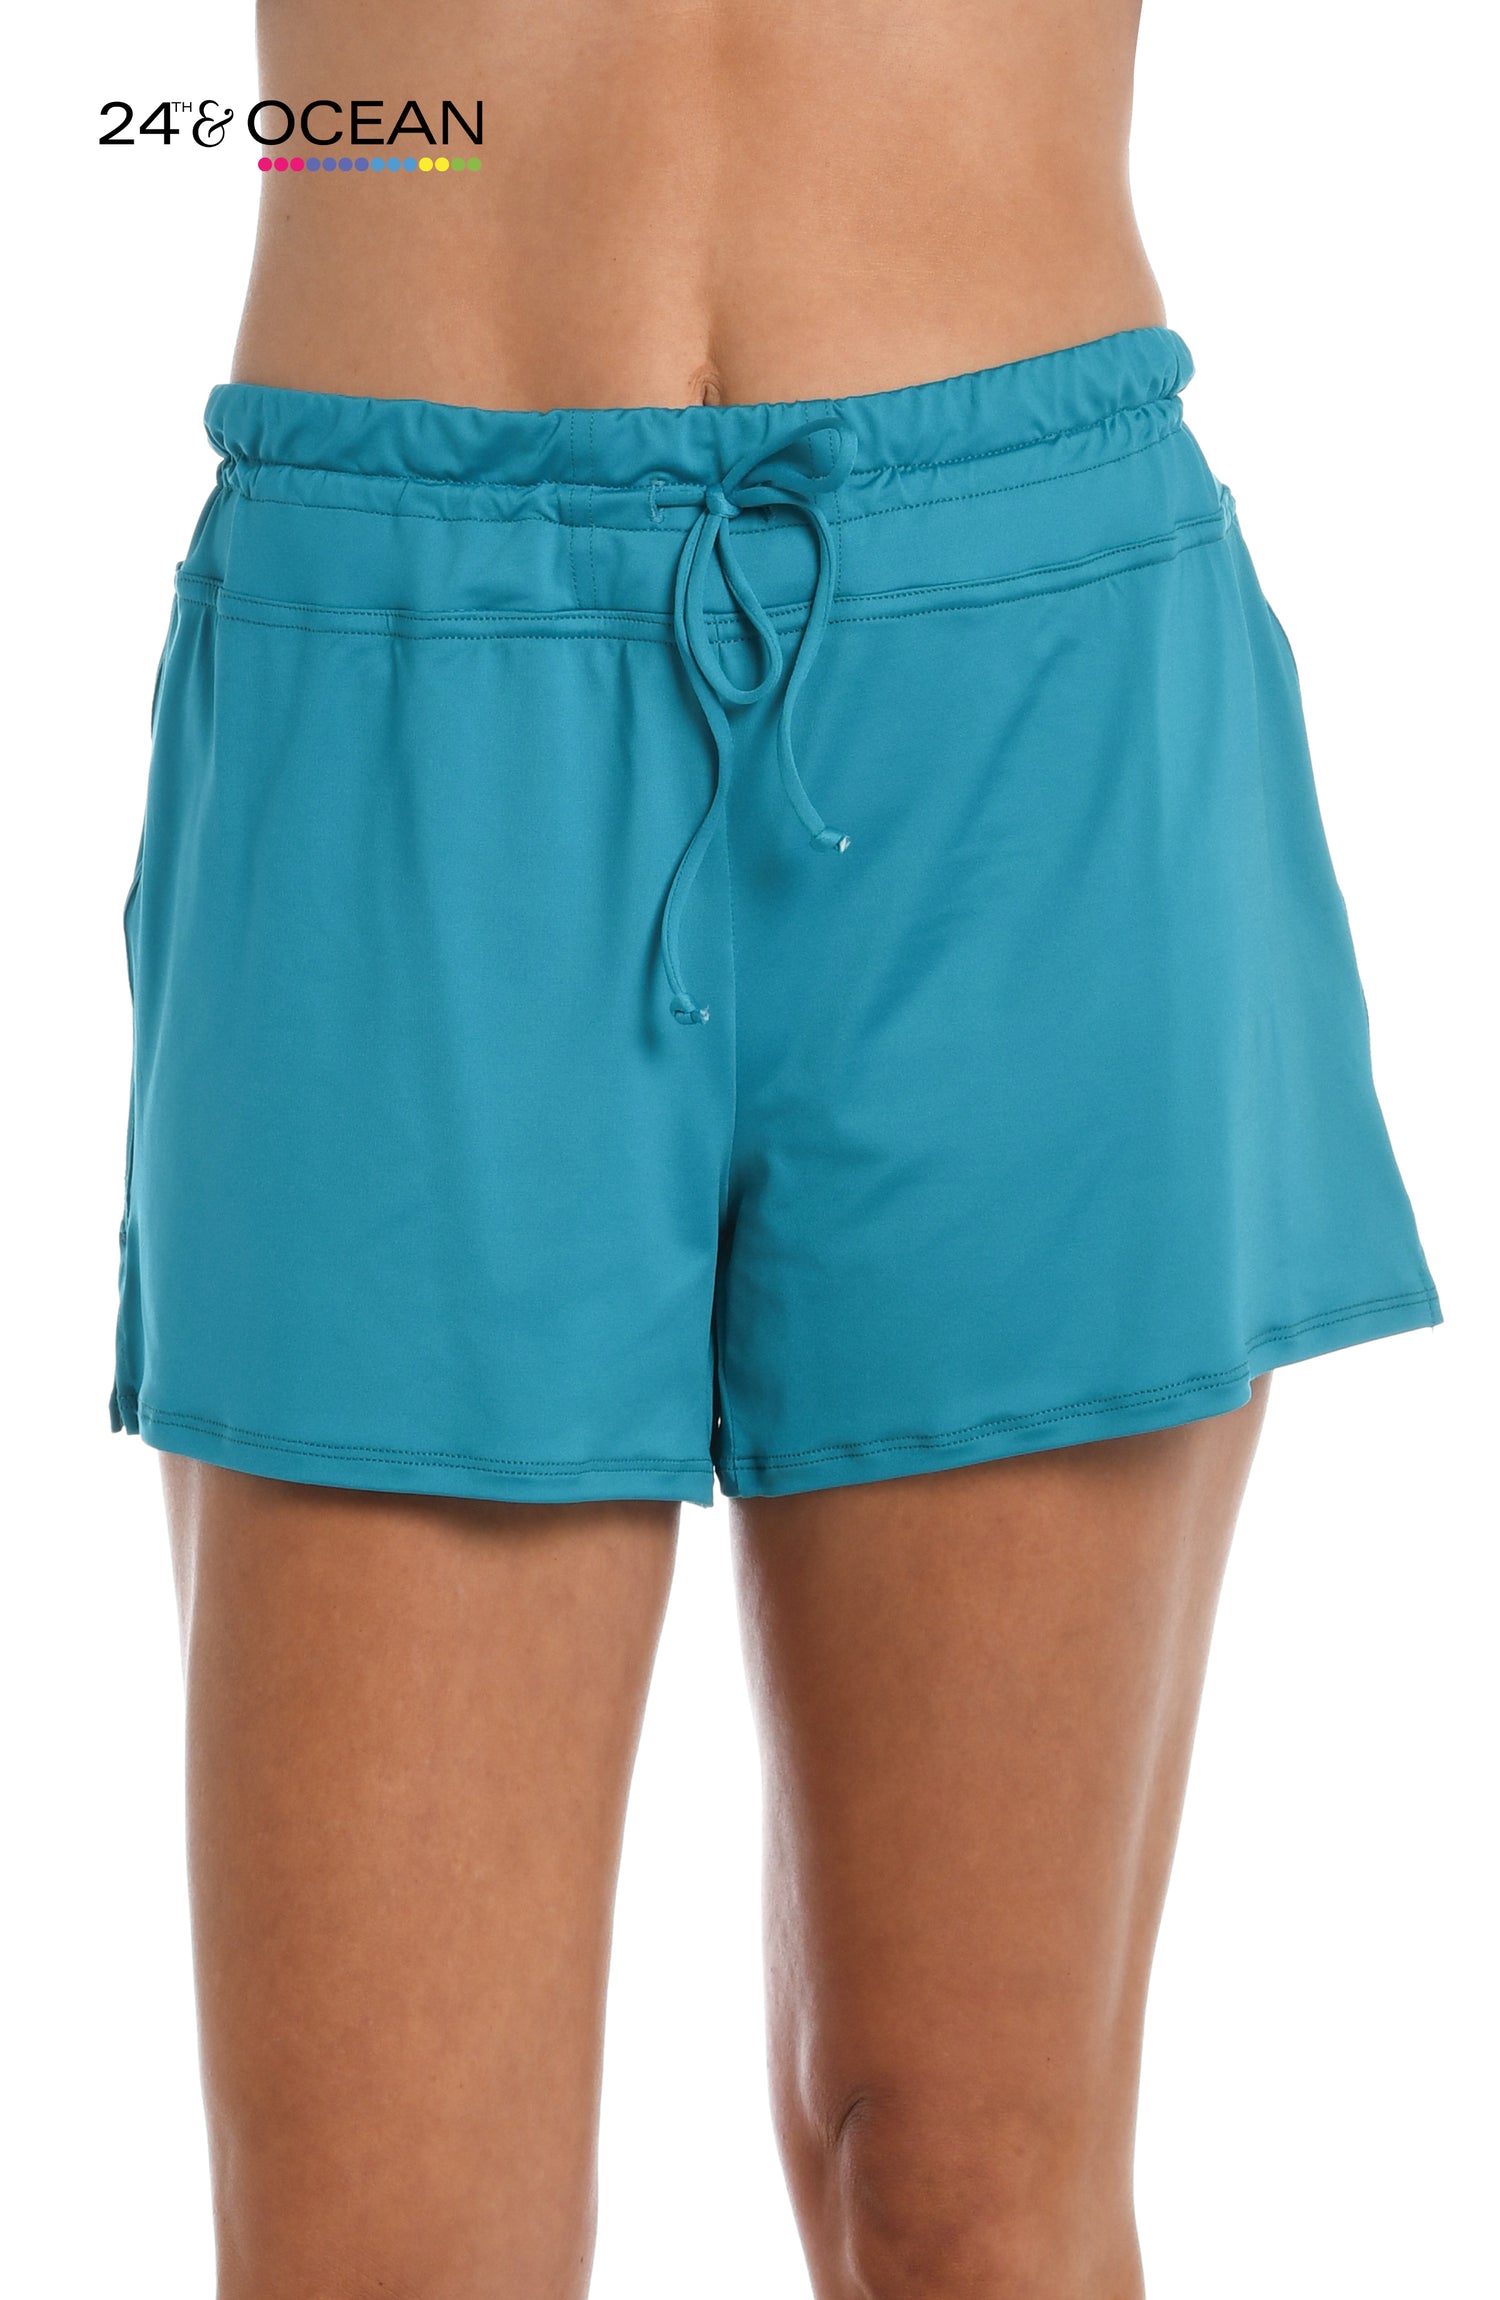 Model is wearing a solid teal colored swim short bottom from our 24th & Ocean brand.